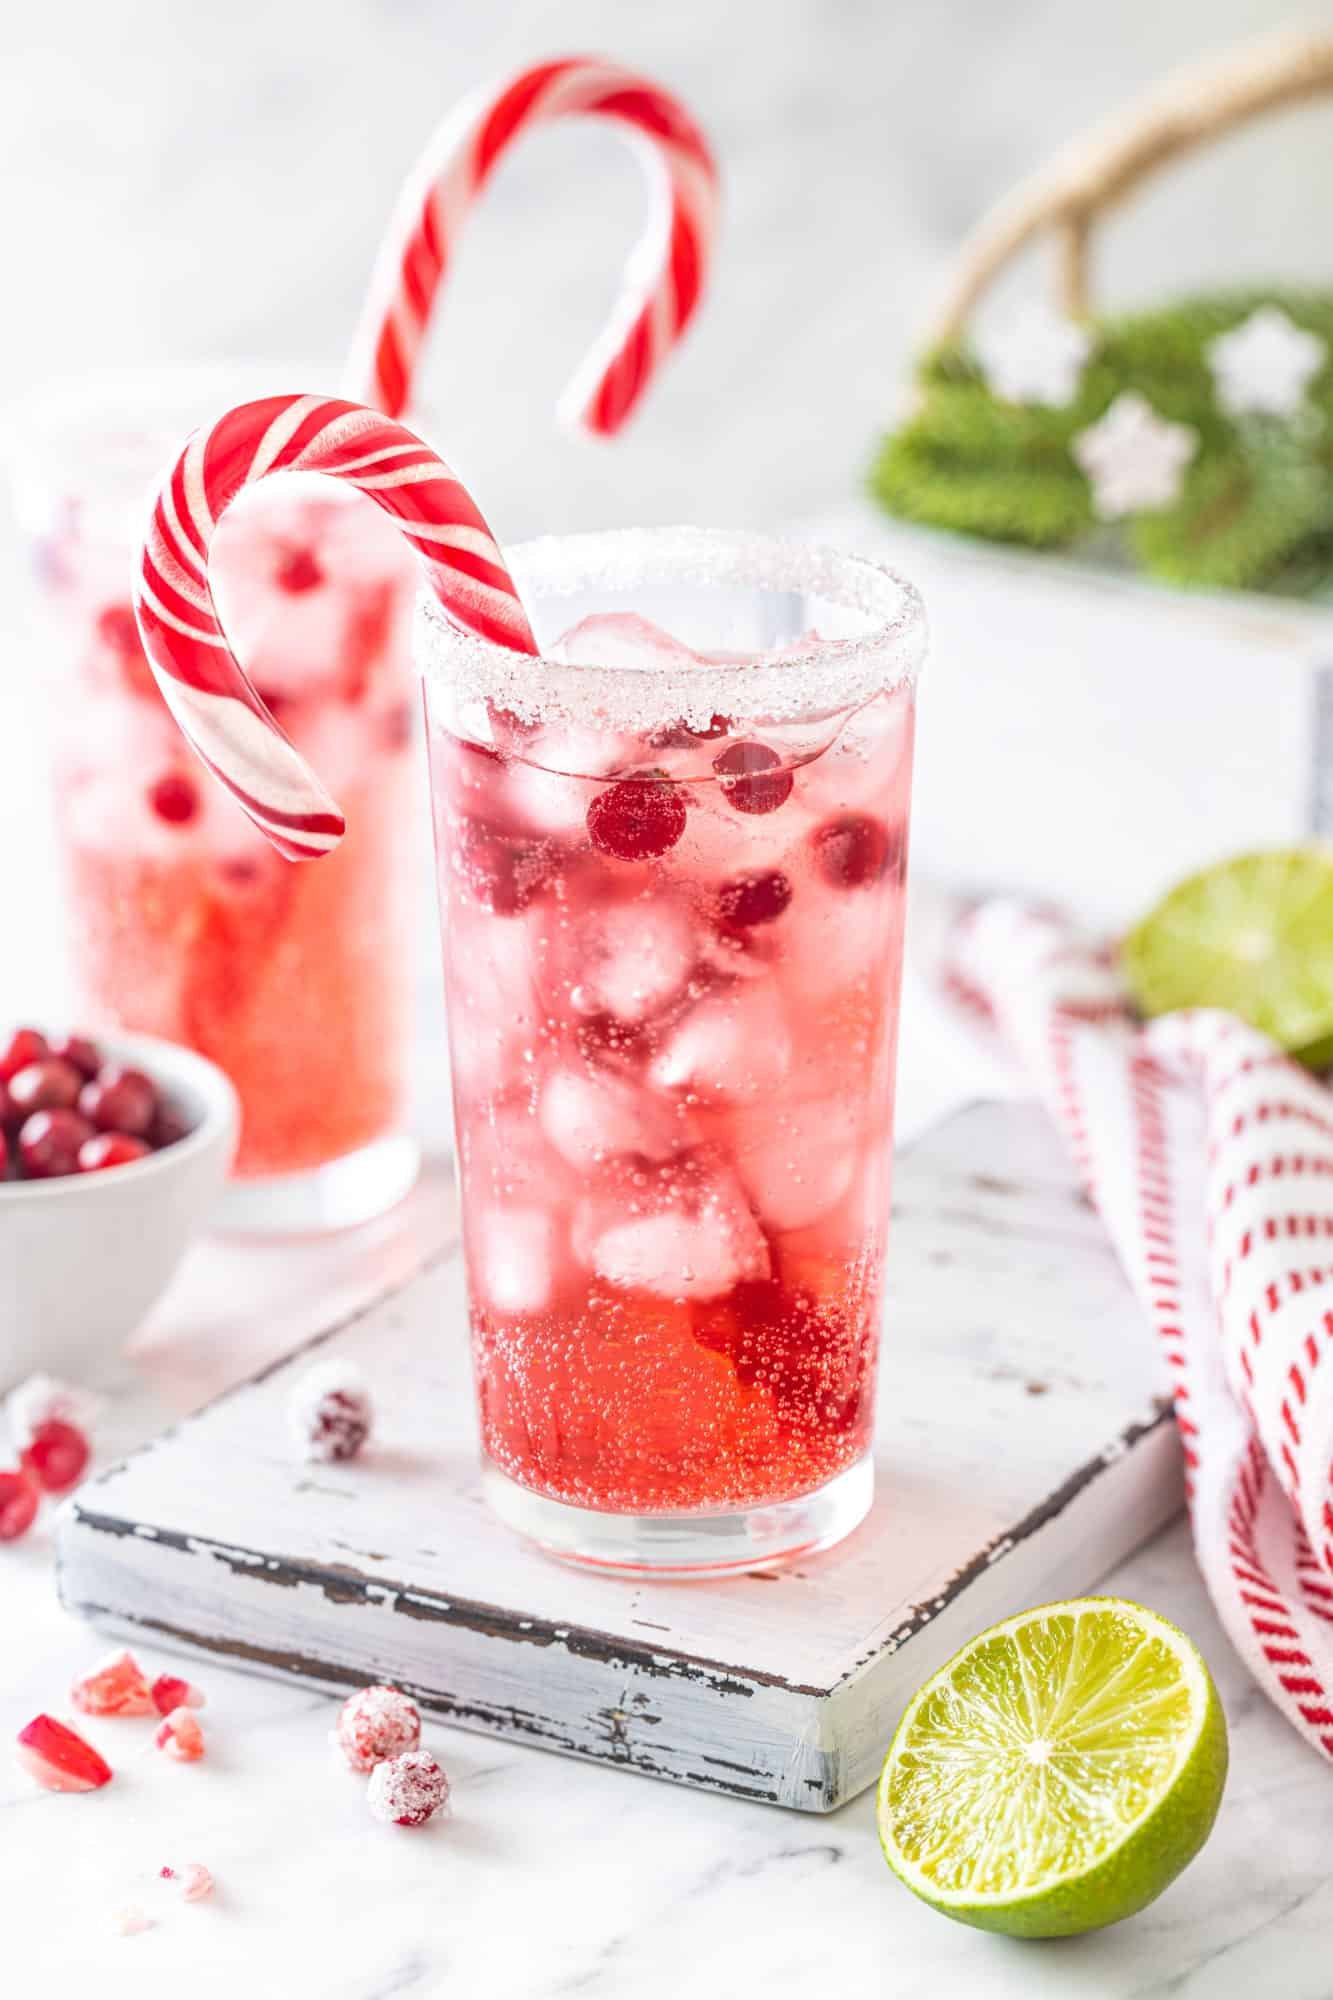 a pink and red mocktail drink put together in a glass cup with sugar on the rim and a candy cane in the cup on a wooden board with a lime wedge on the side.